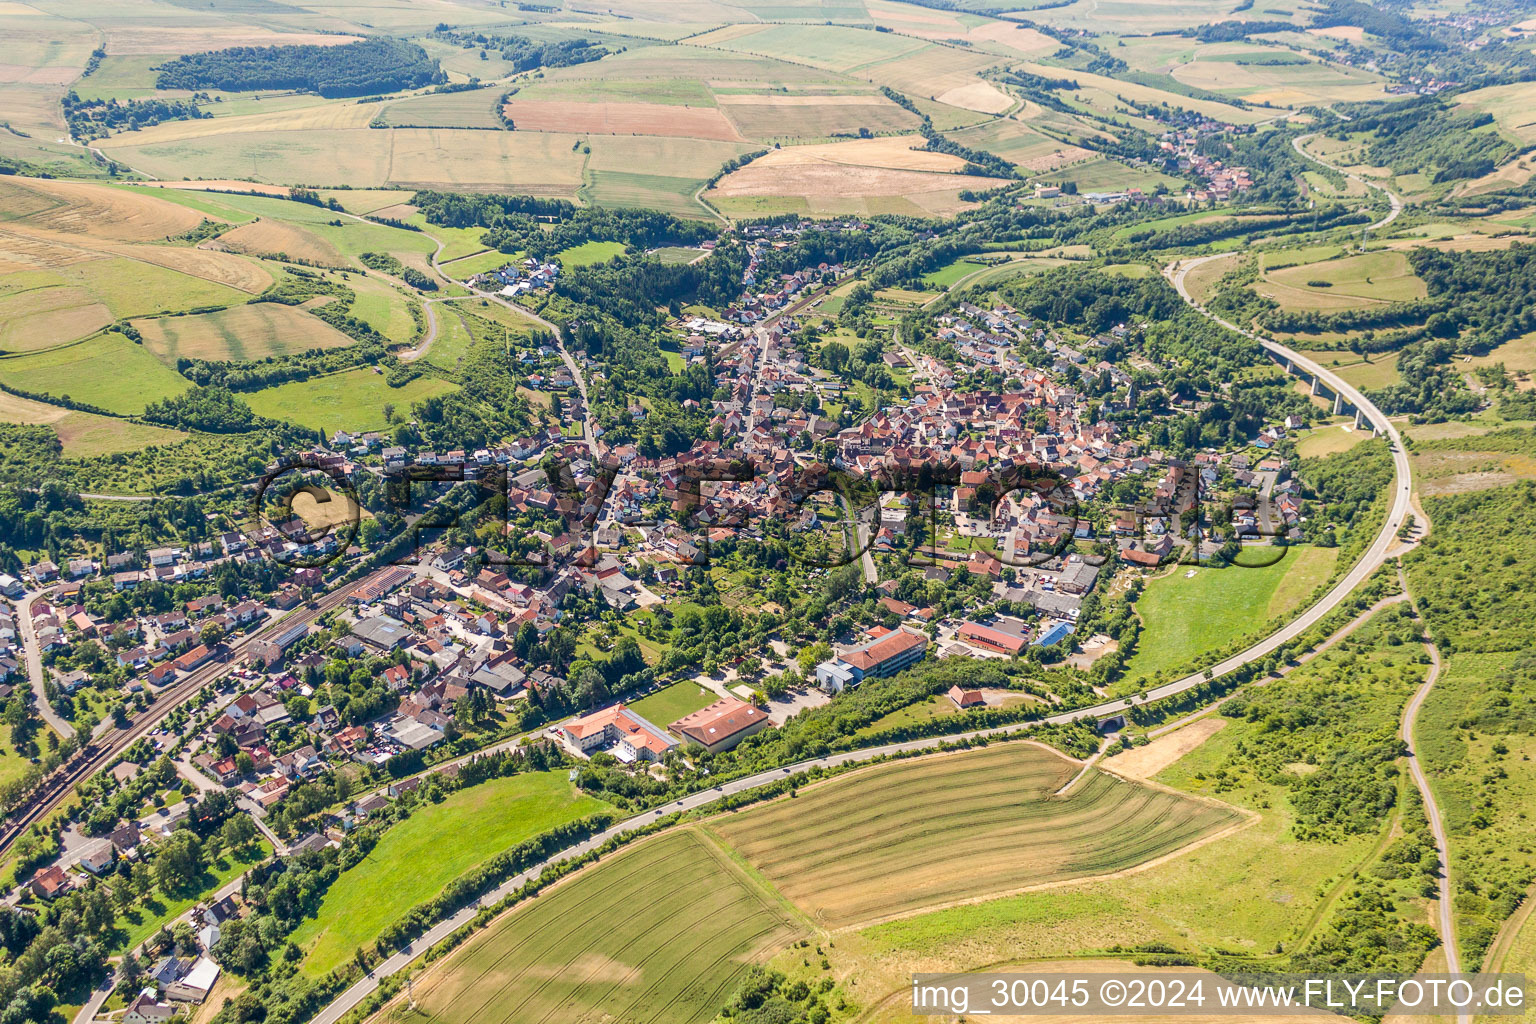 Aerial view of Village - view on the edge of agricultural fields and farmland in Alsenz in the state Rhineland-Palatinate, Germany